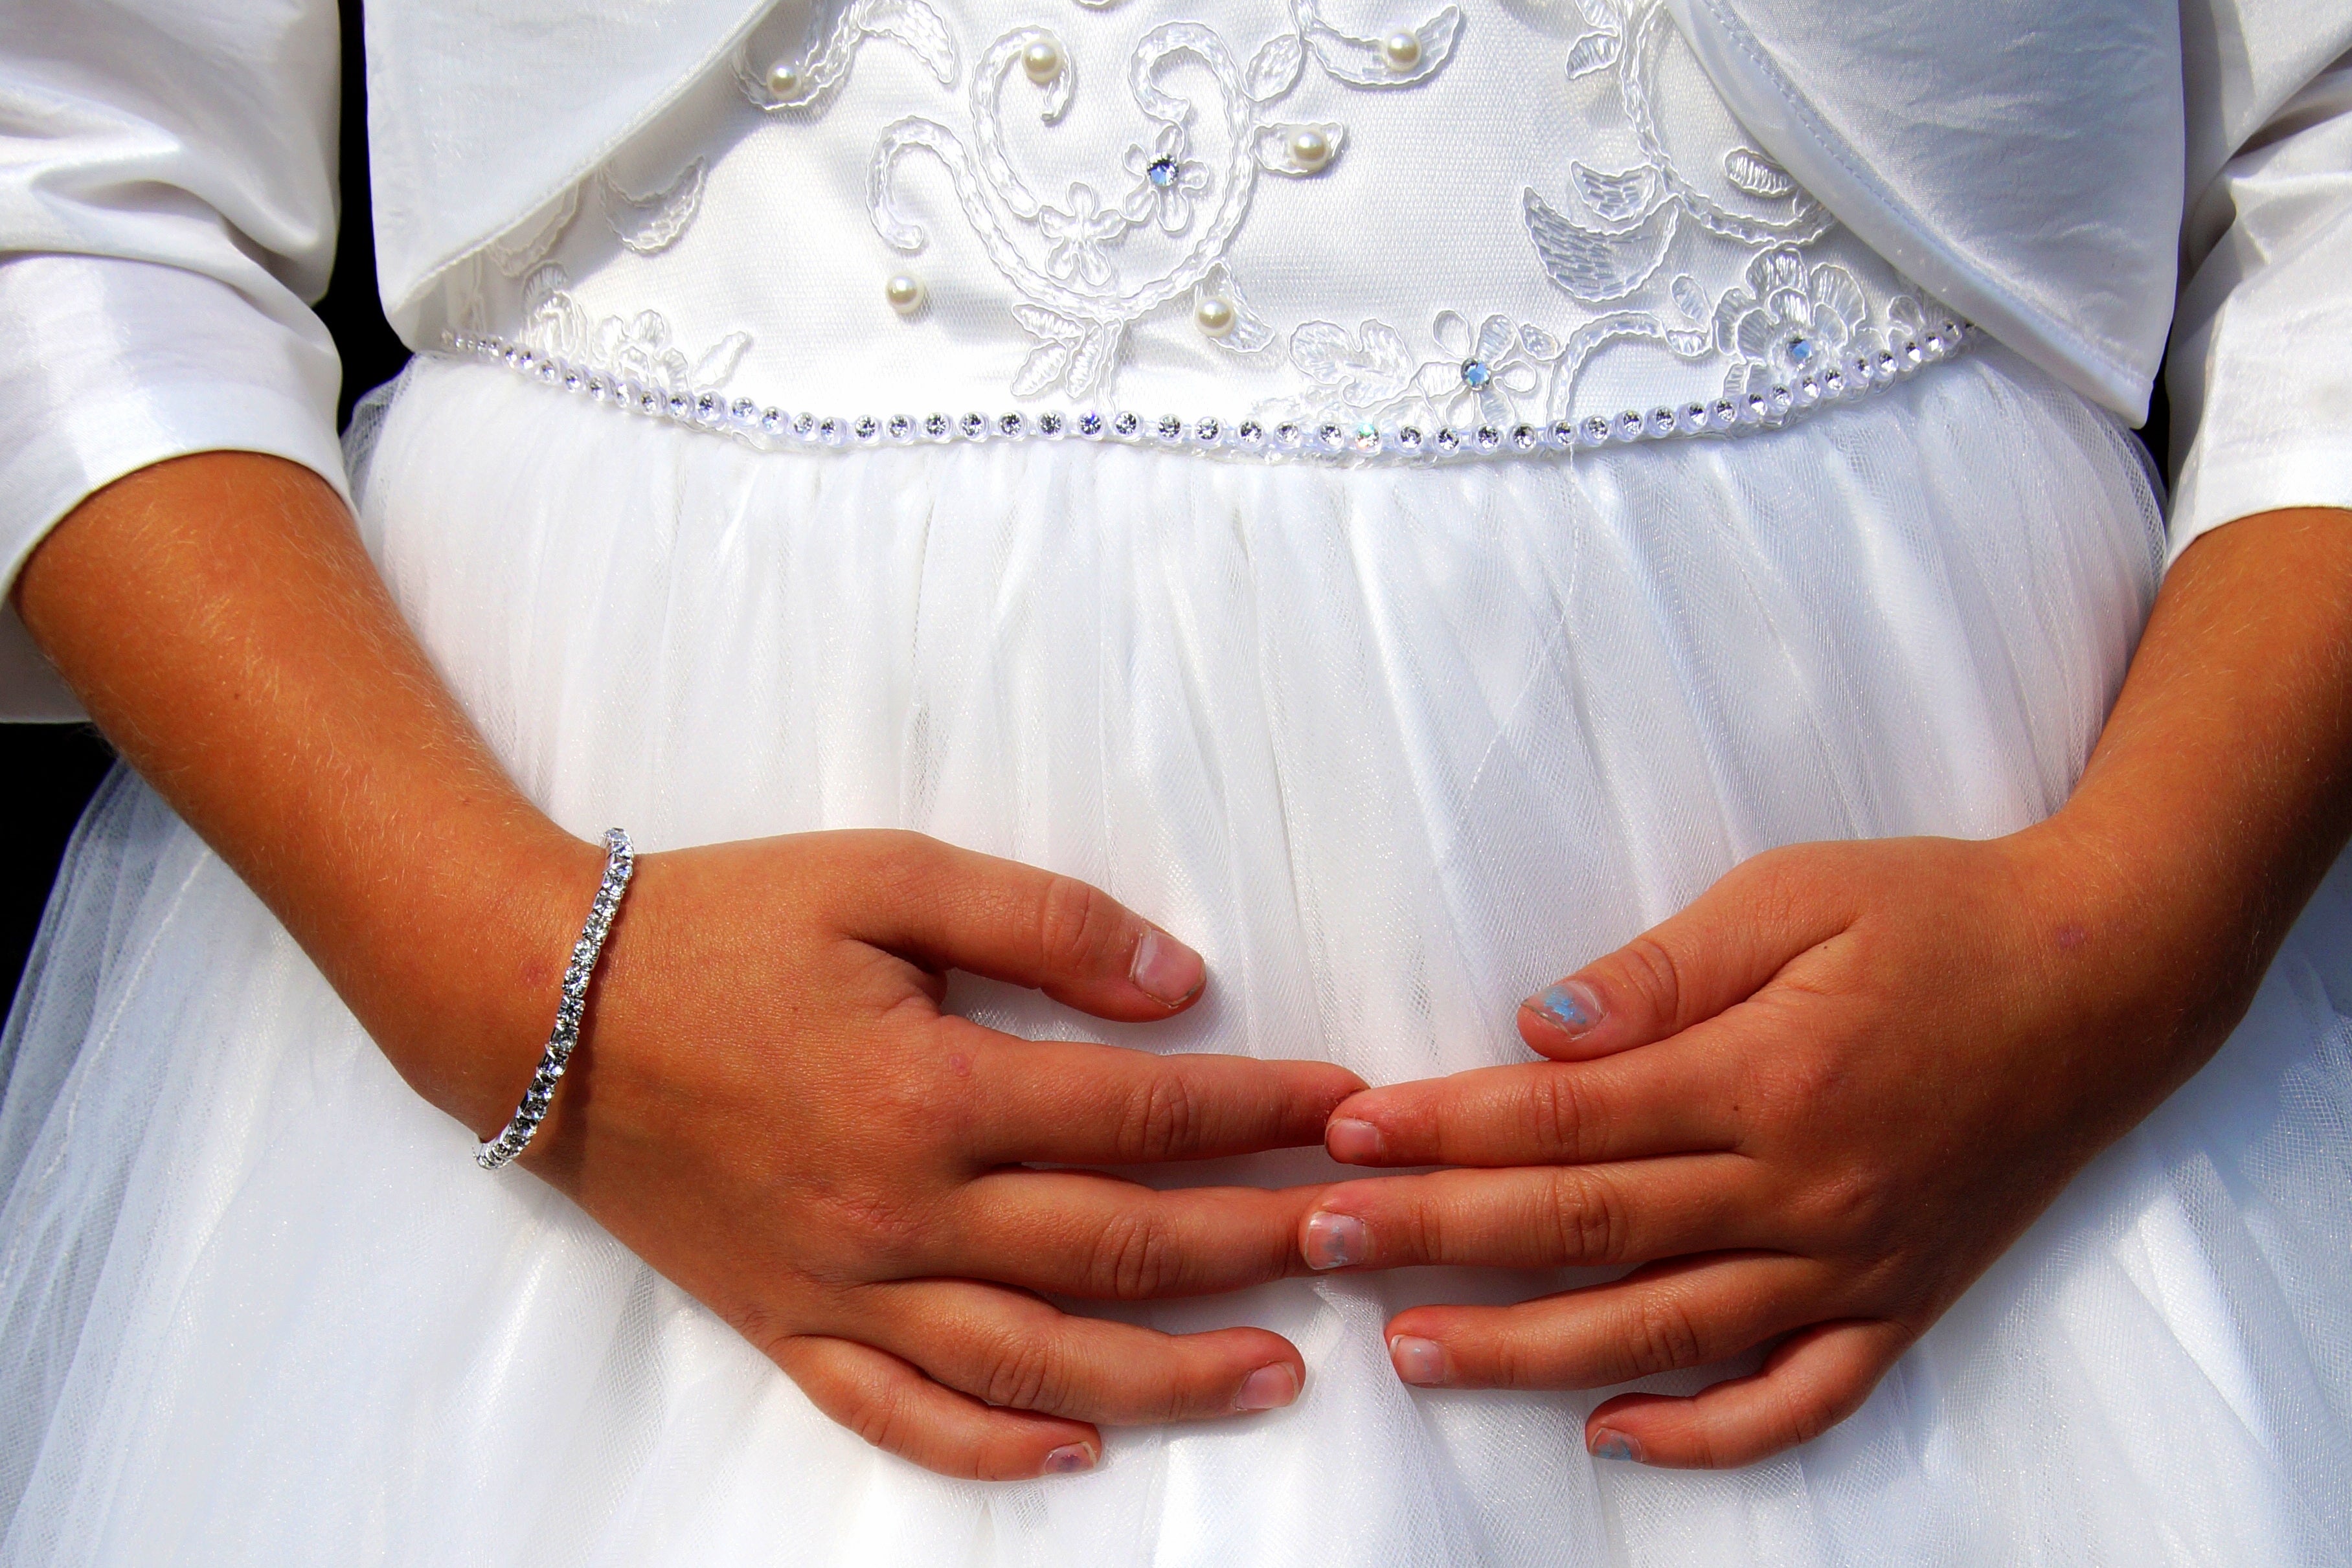 Where Can You Get Married At 16 Without Parental Consent? 